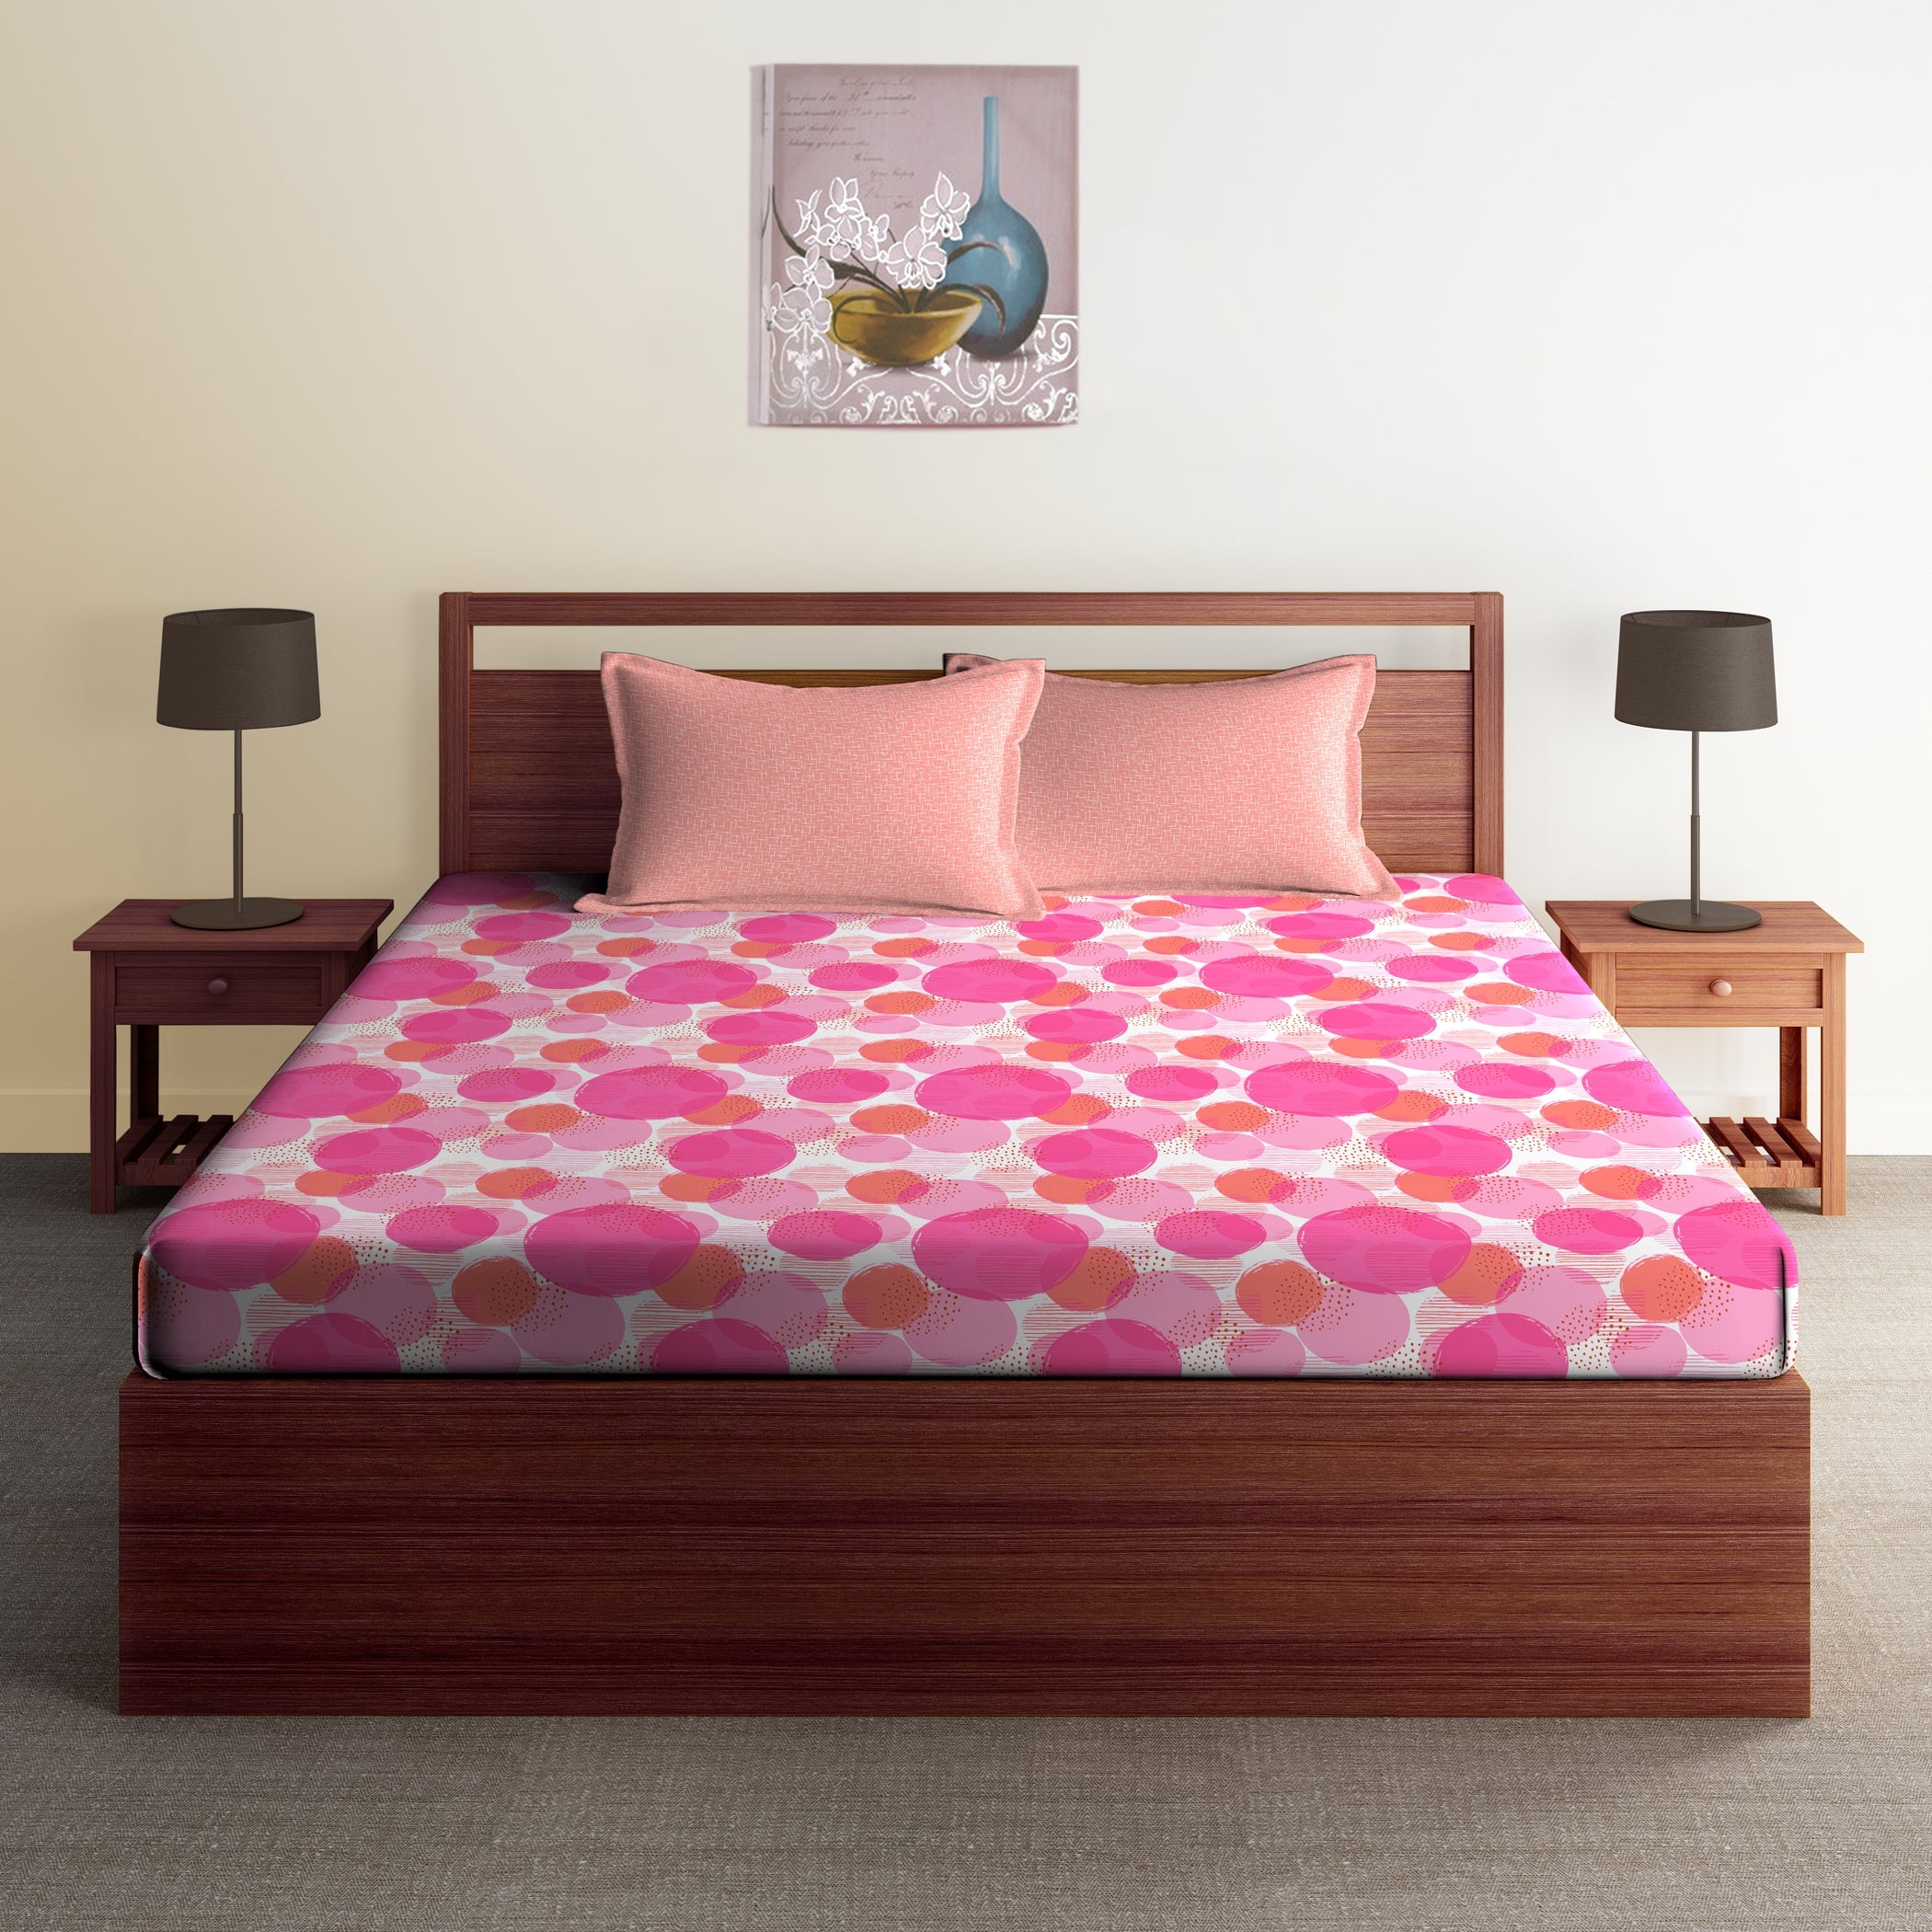 Core Designed By Spaces Season Best Premium 100% Cotton Double Bedsheet With 2 Pillow Covers 144 TC(Pink)